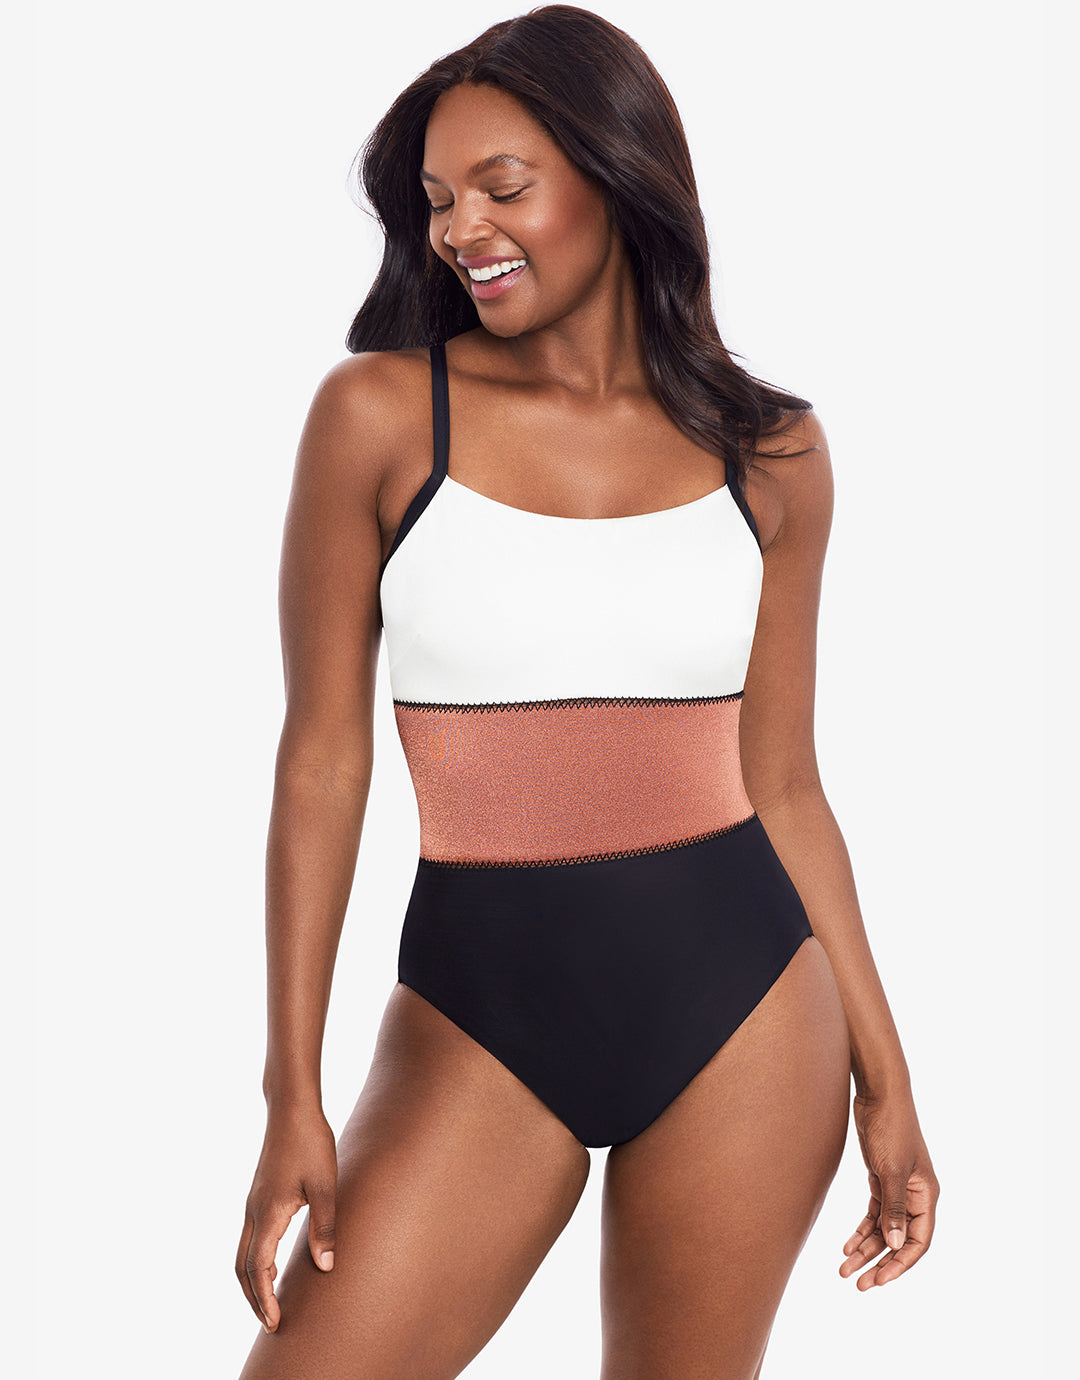 Spectra Trifectra Swimsuit - Simply Beach UK